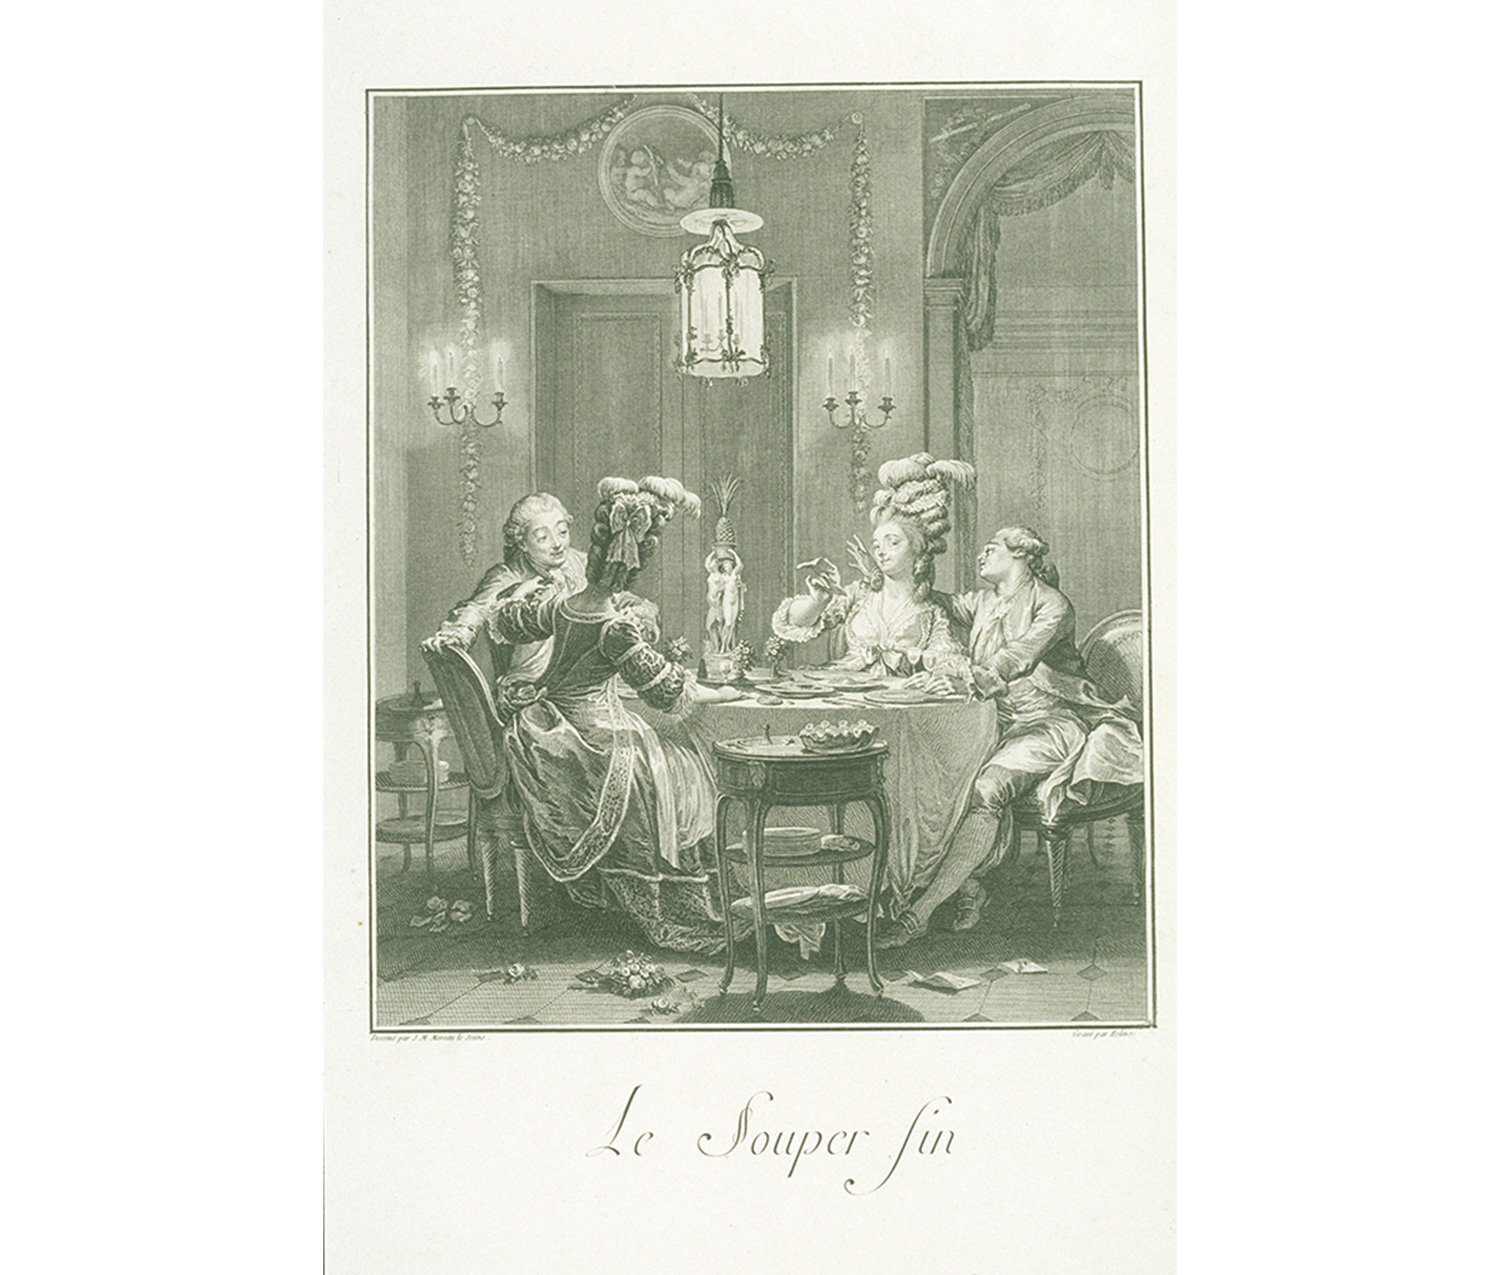 two elaborately-dressed couples sit at a table eating dinner